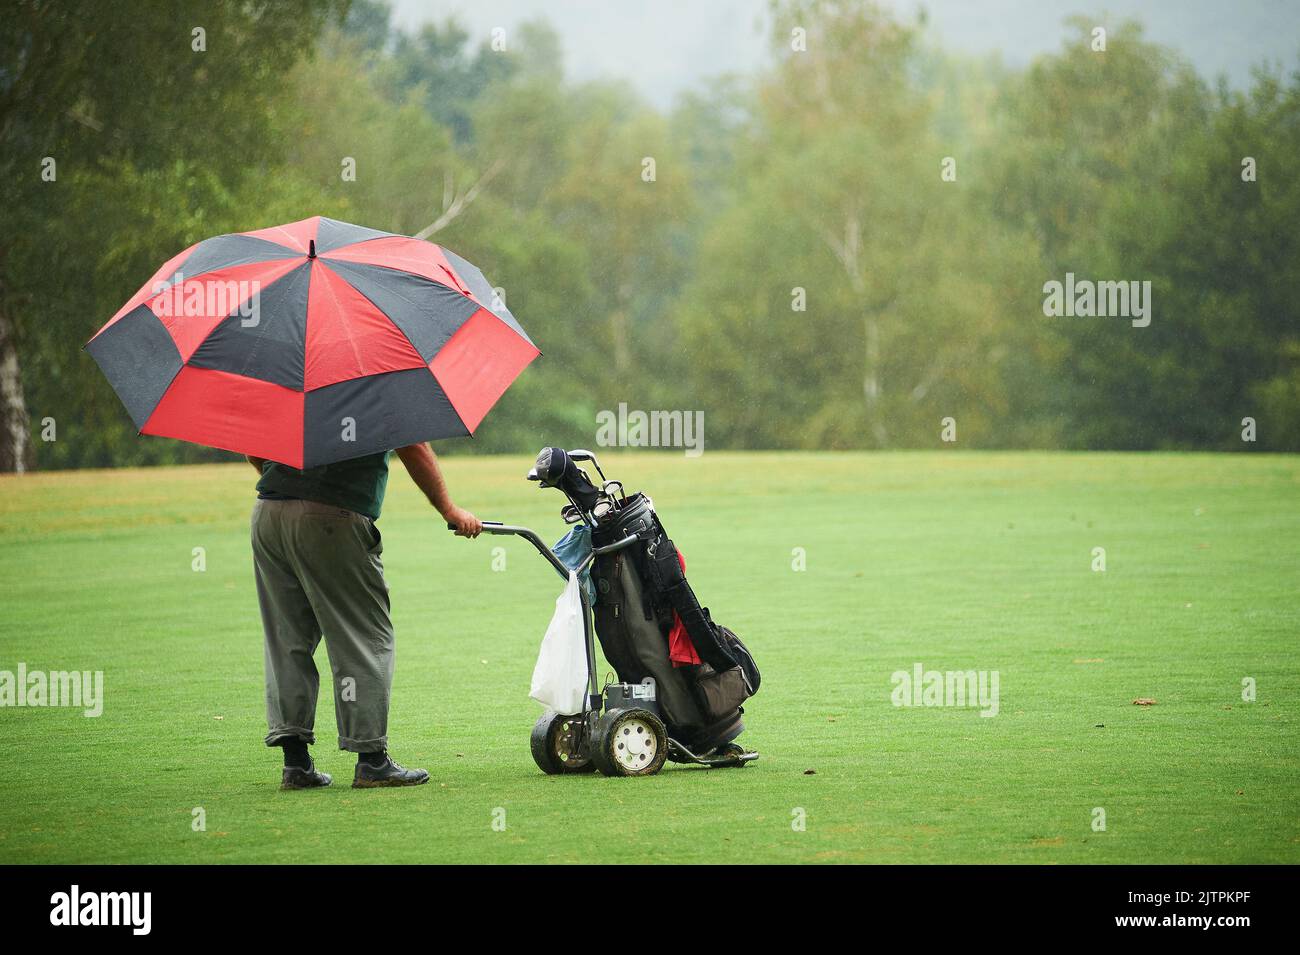 Man with colorist umbrella and electric golf cart under rain in the golf course Stock Photo